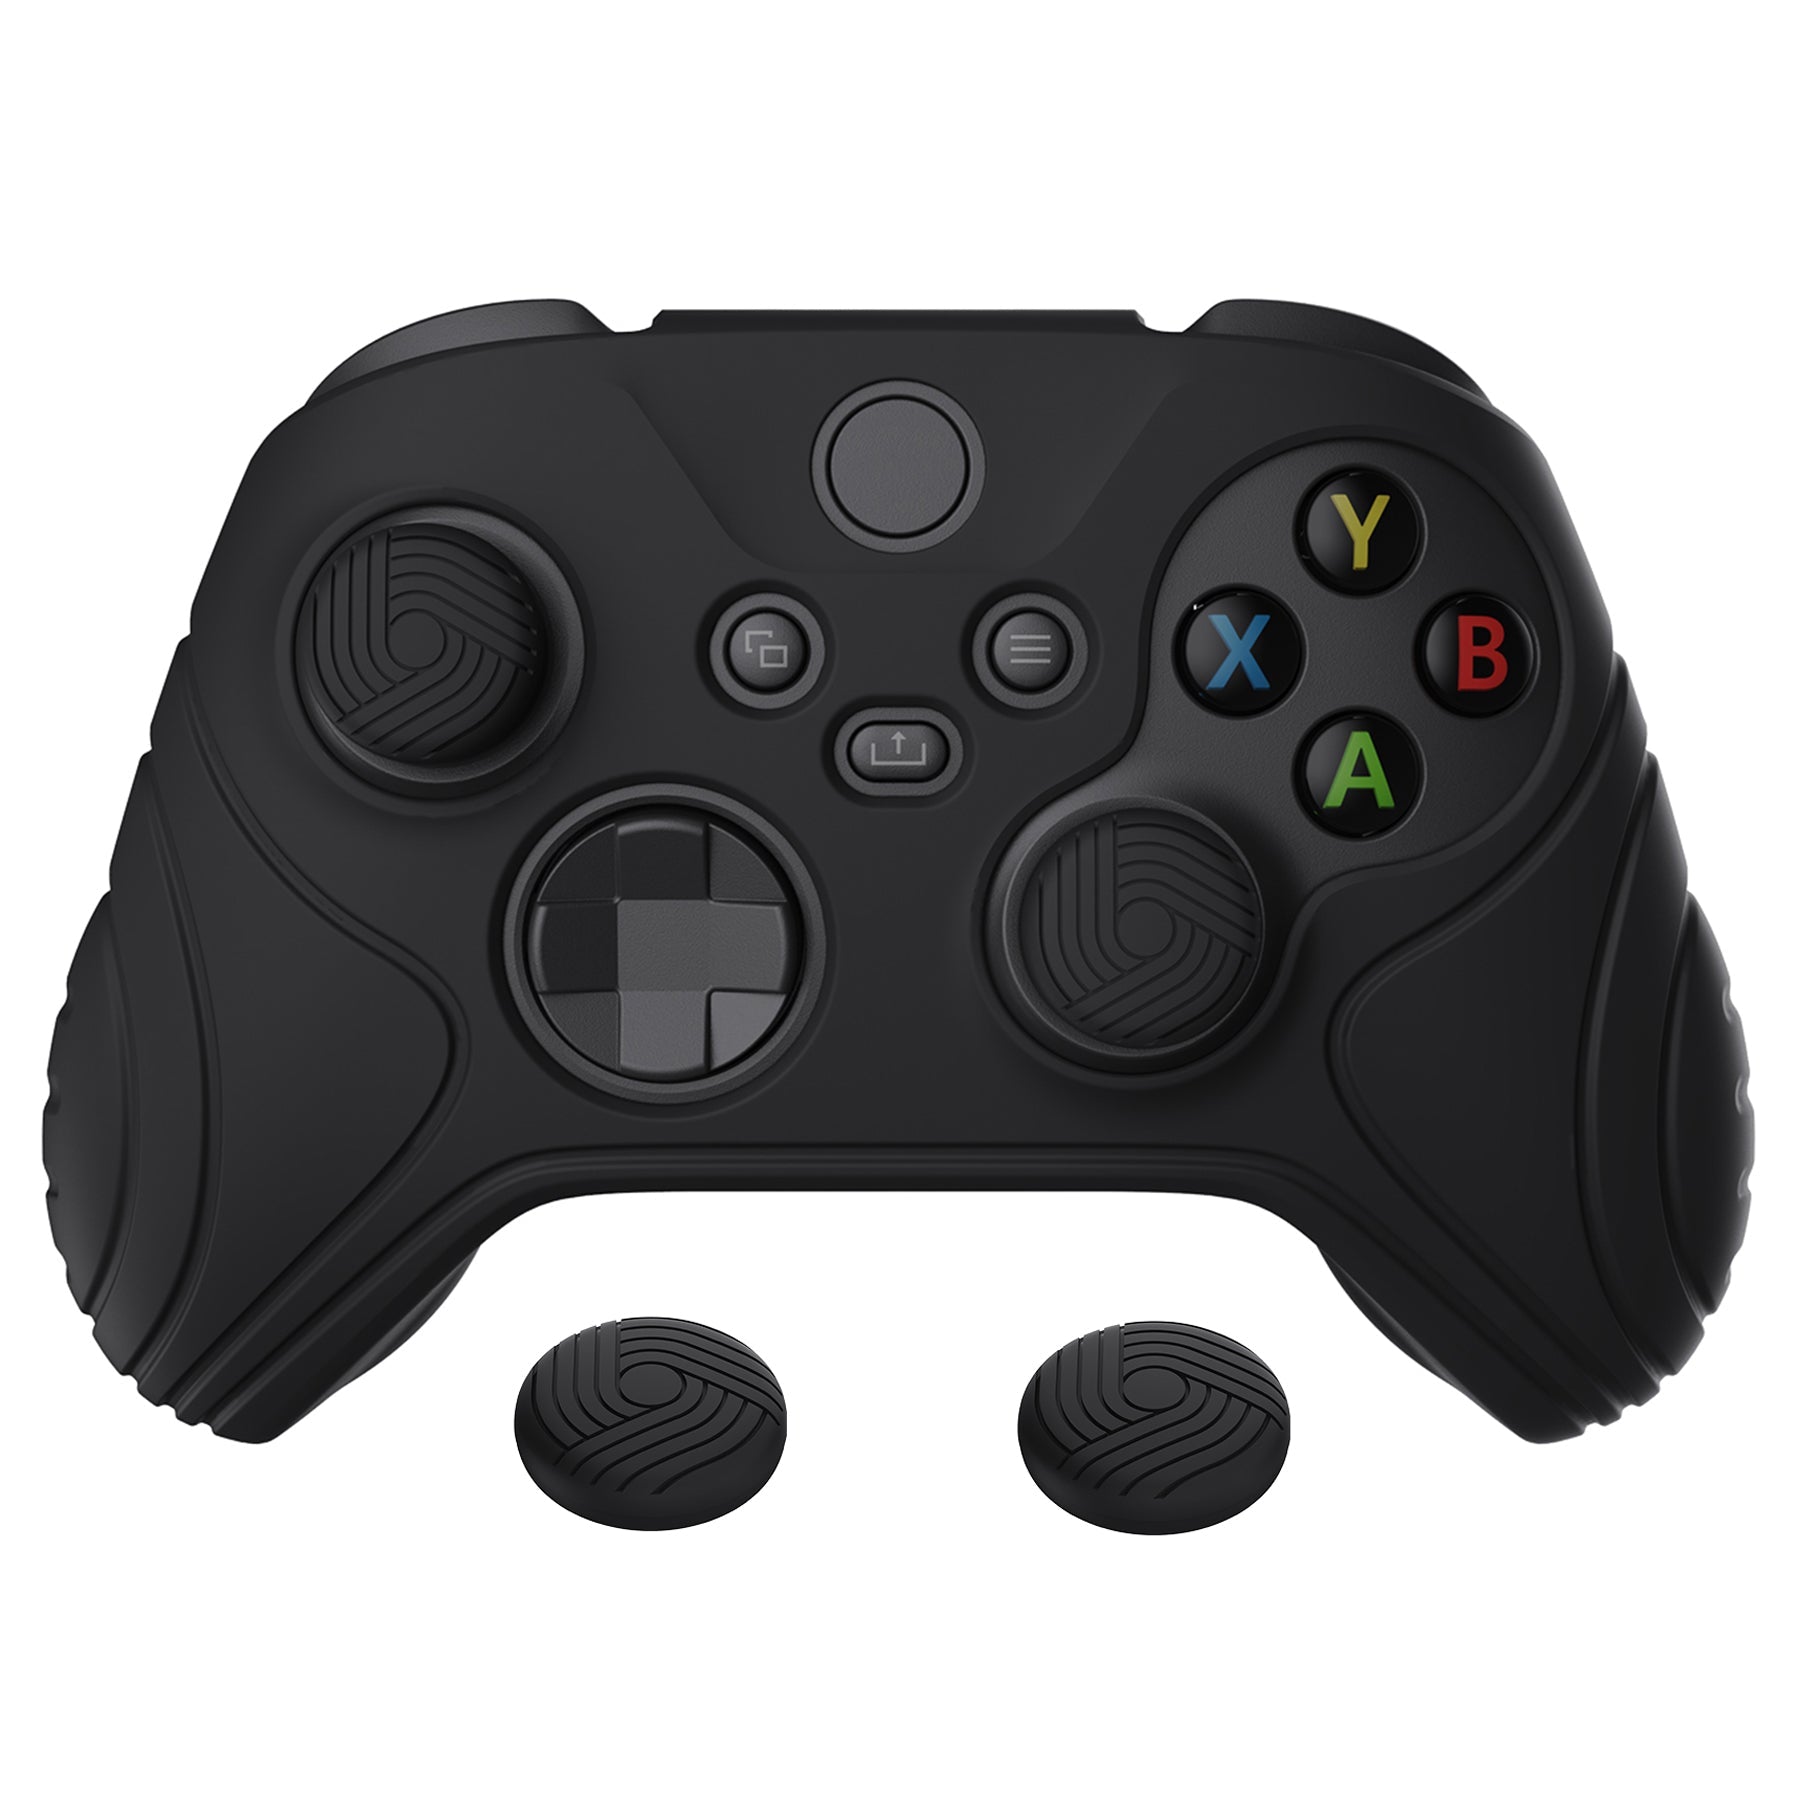 PlayVital Black Ergonomic Stick Caps Thumb Grips for PS5, for PS4, Xbox Series X/S, Xbox One, Xbox One X/S, Switch Pro Controller - with 3 Height